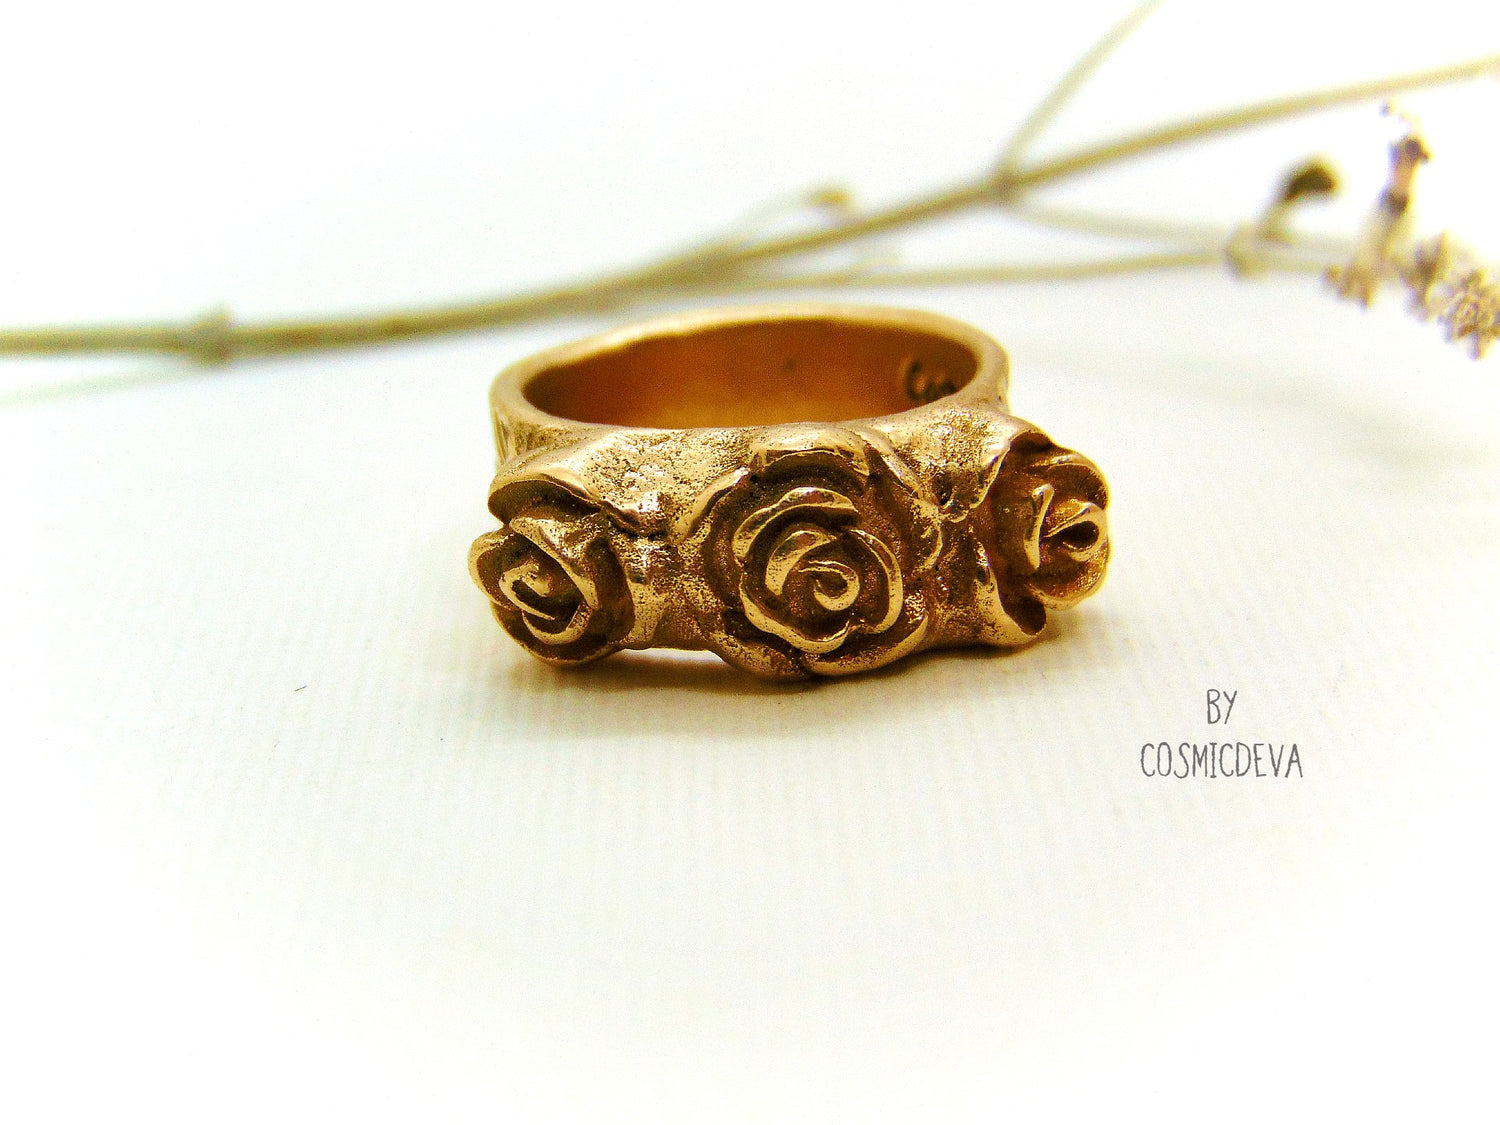 Handmade and hand formed unique organic solid gold bronze roman style ring featuring three roses with a heart 💕 on the bottom side.